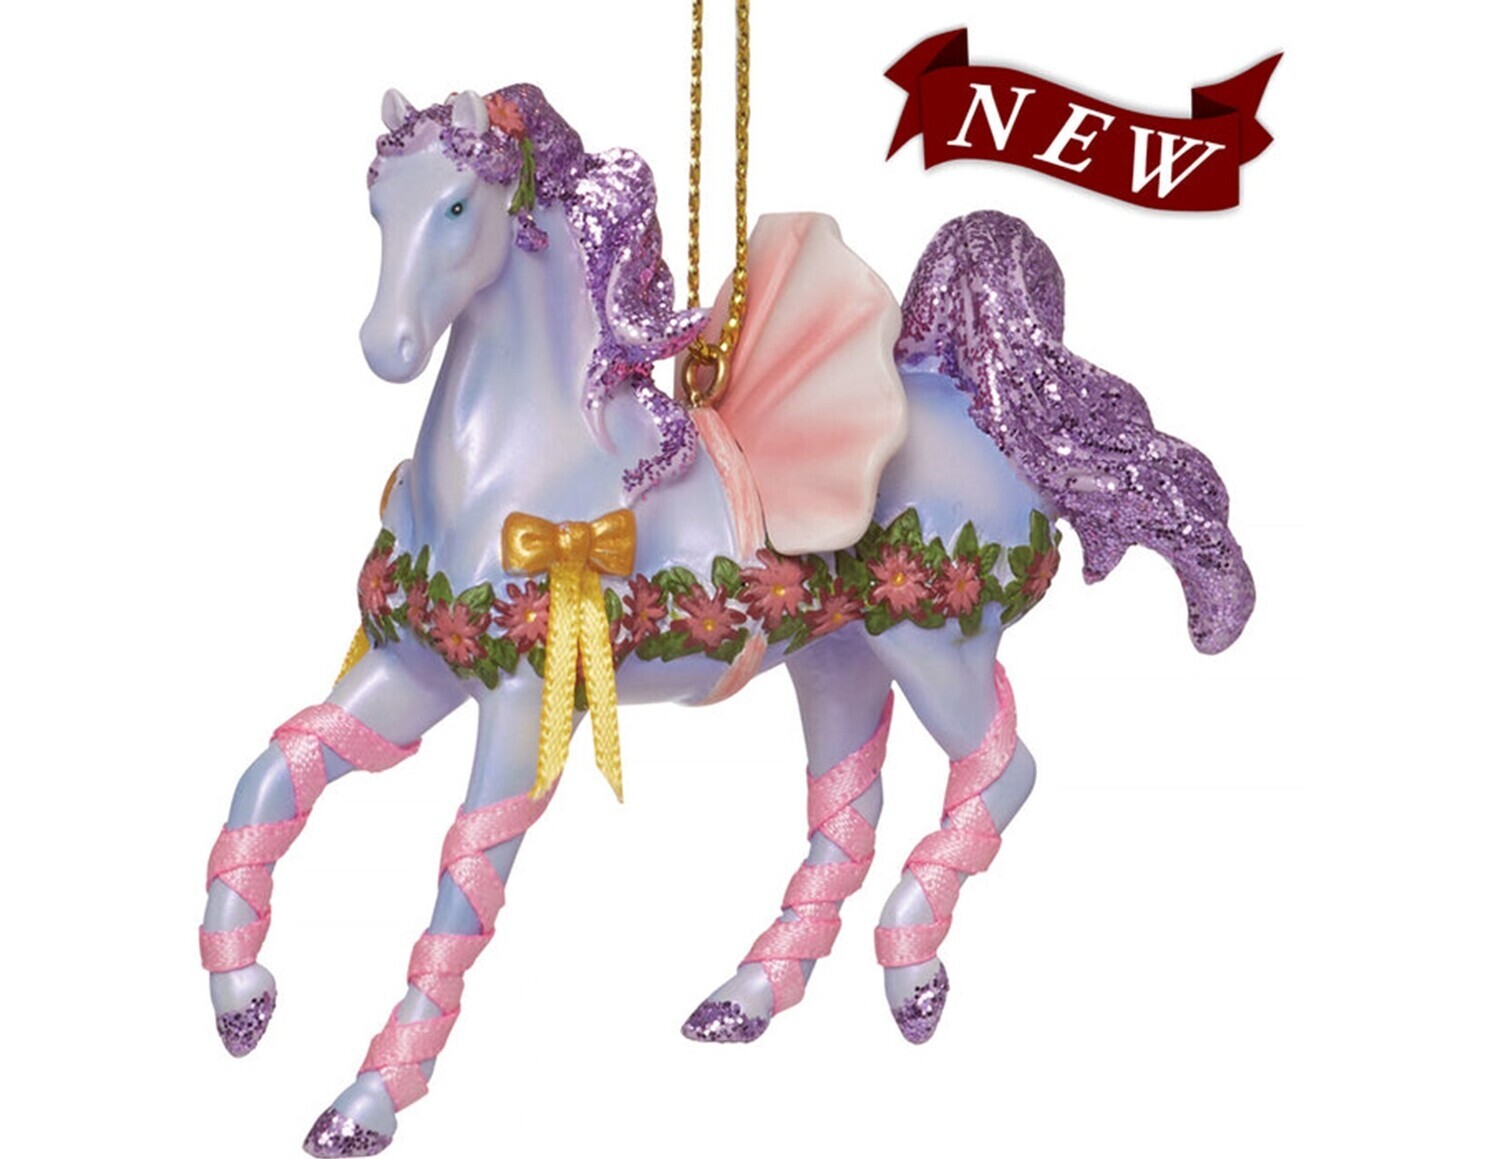 Trail of Painted Ponies "Dance of the Sugar Plum Ponies" Horse Ornament (6012853)